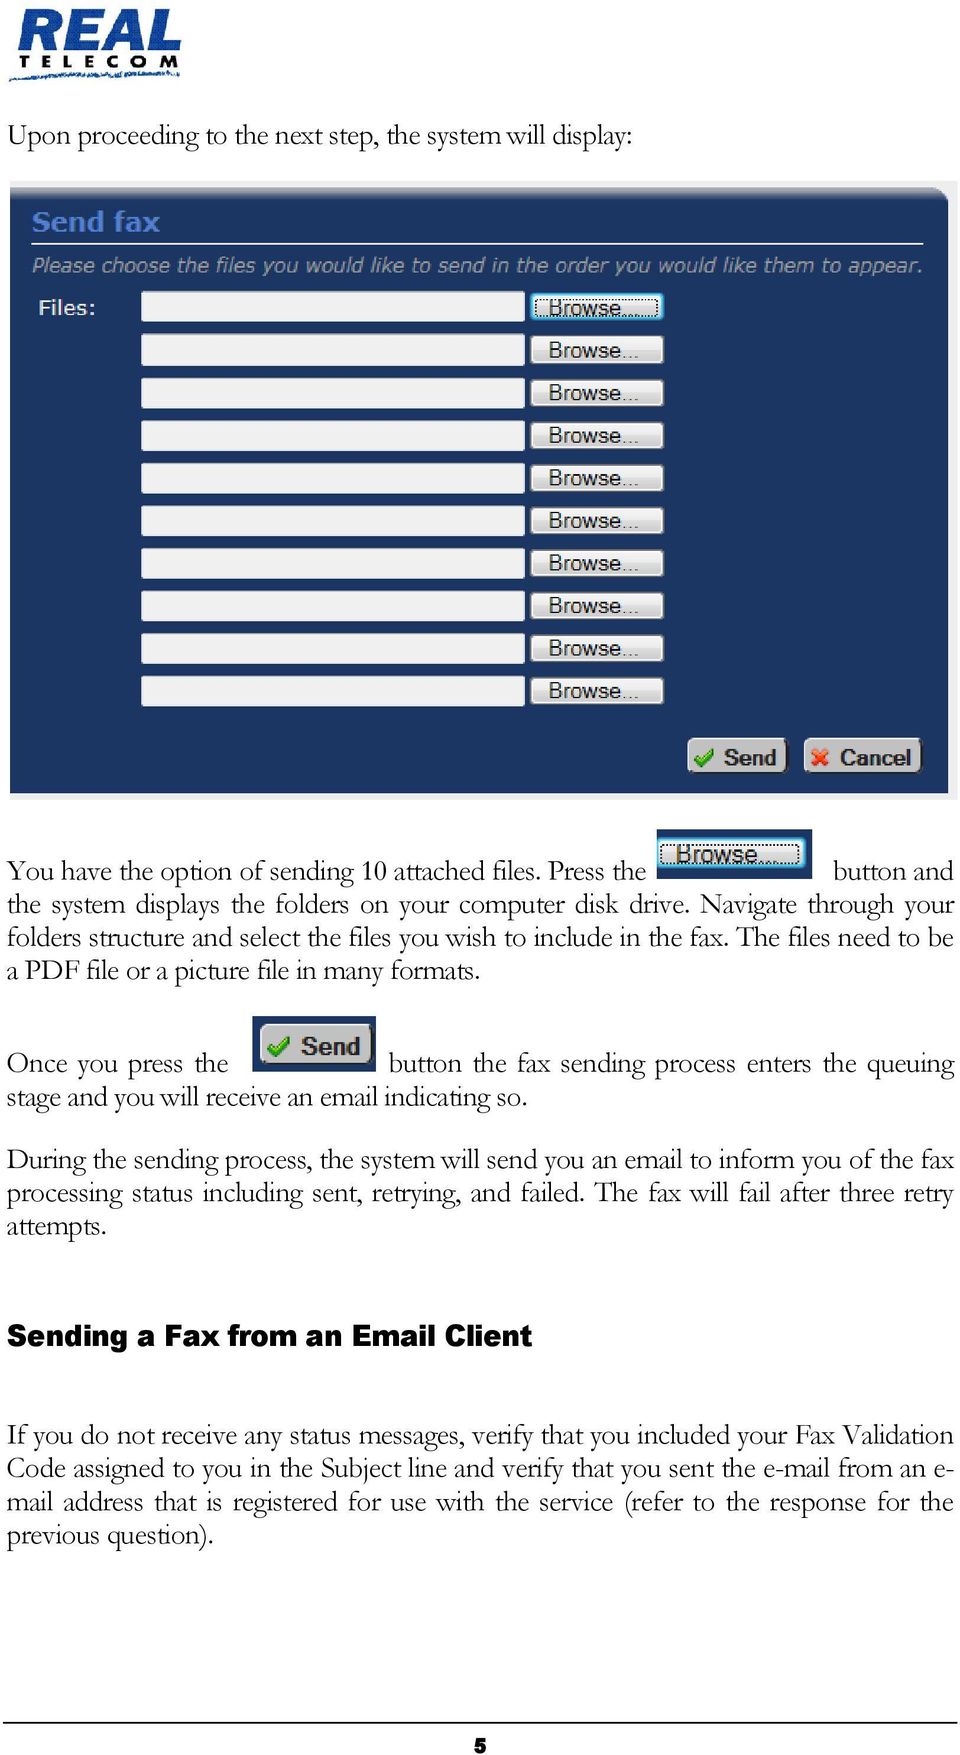 Once you press the button the fax sending process enters the queuing stage and you will receive an email indicating so.